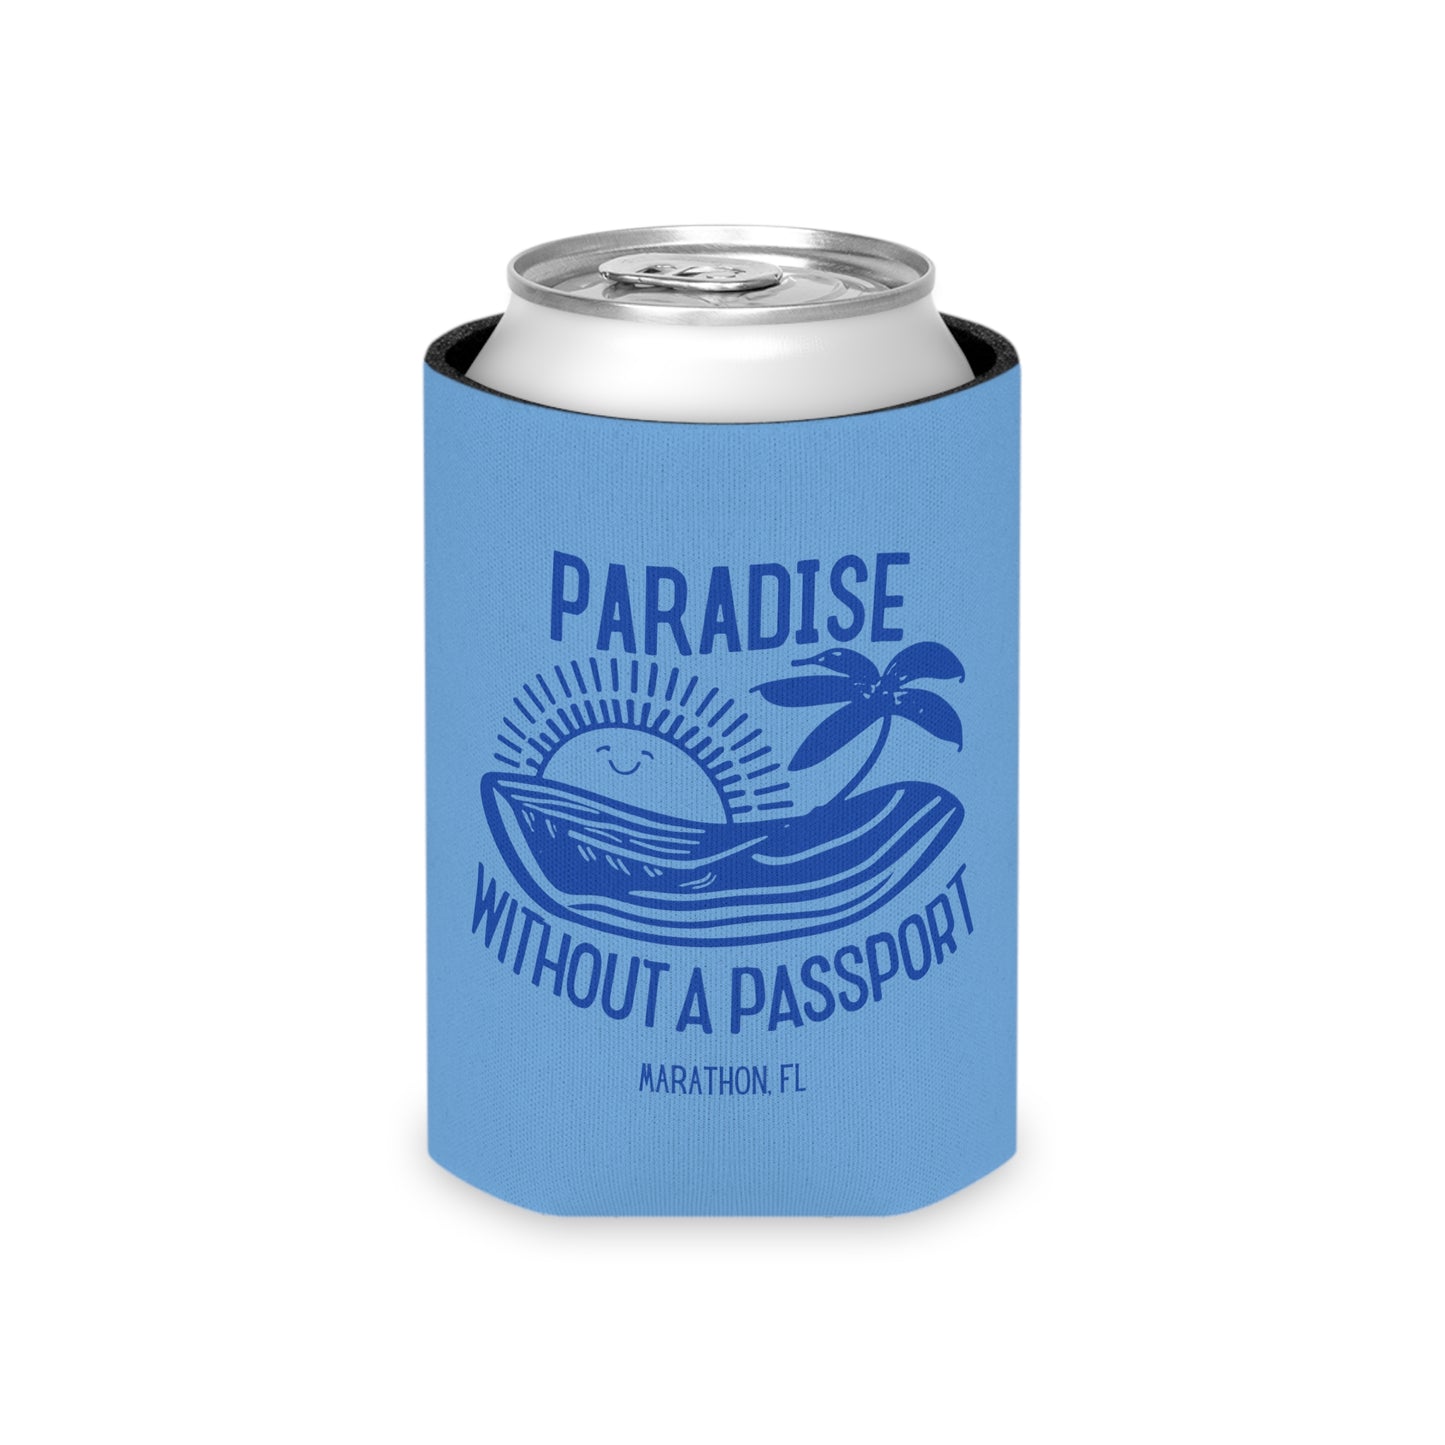 PARADISE WITHOUT A PASSPORT - MARATHON FL, BLUE CAN COOZIE